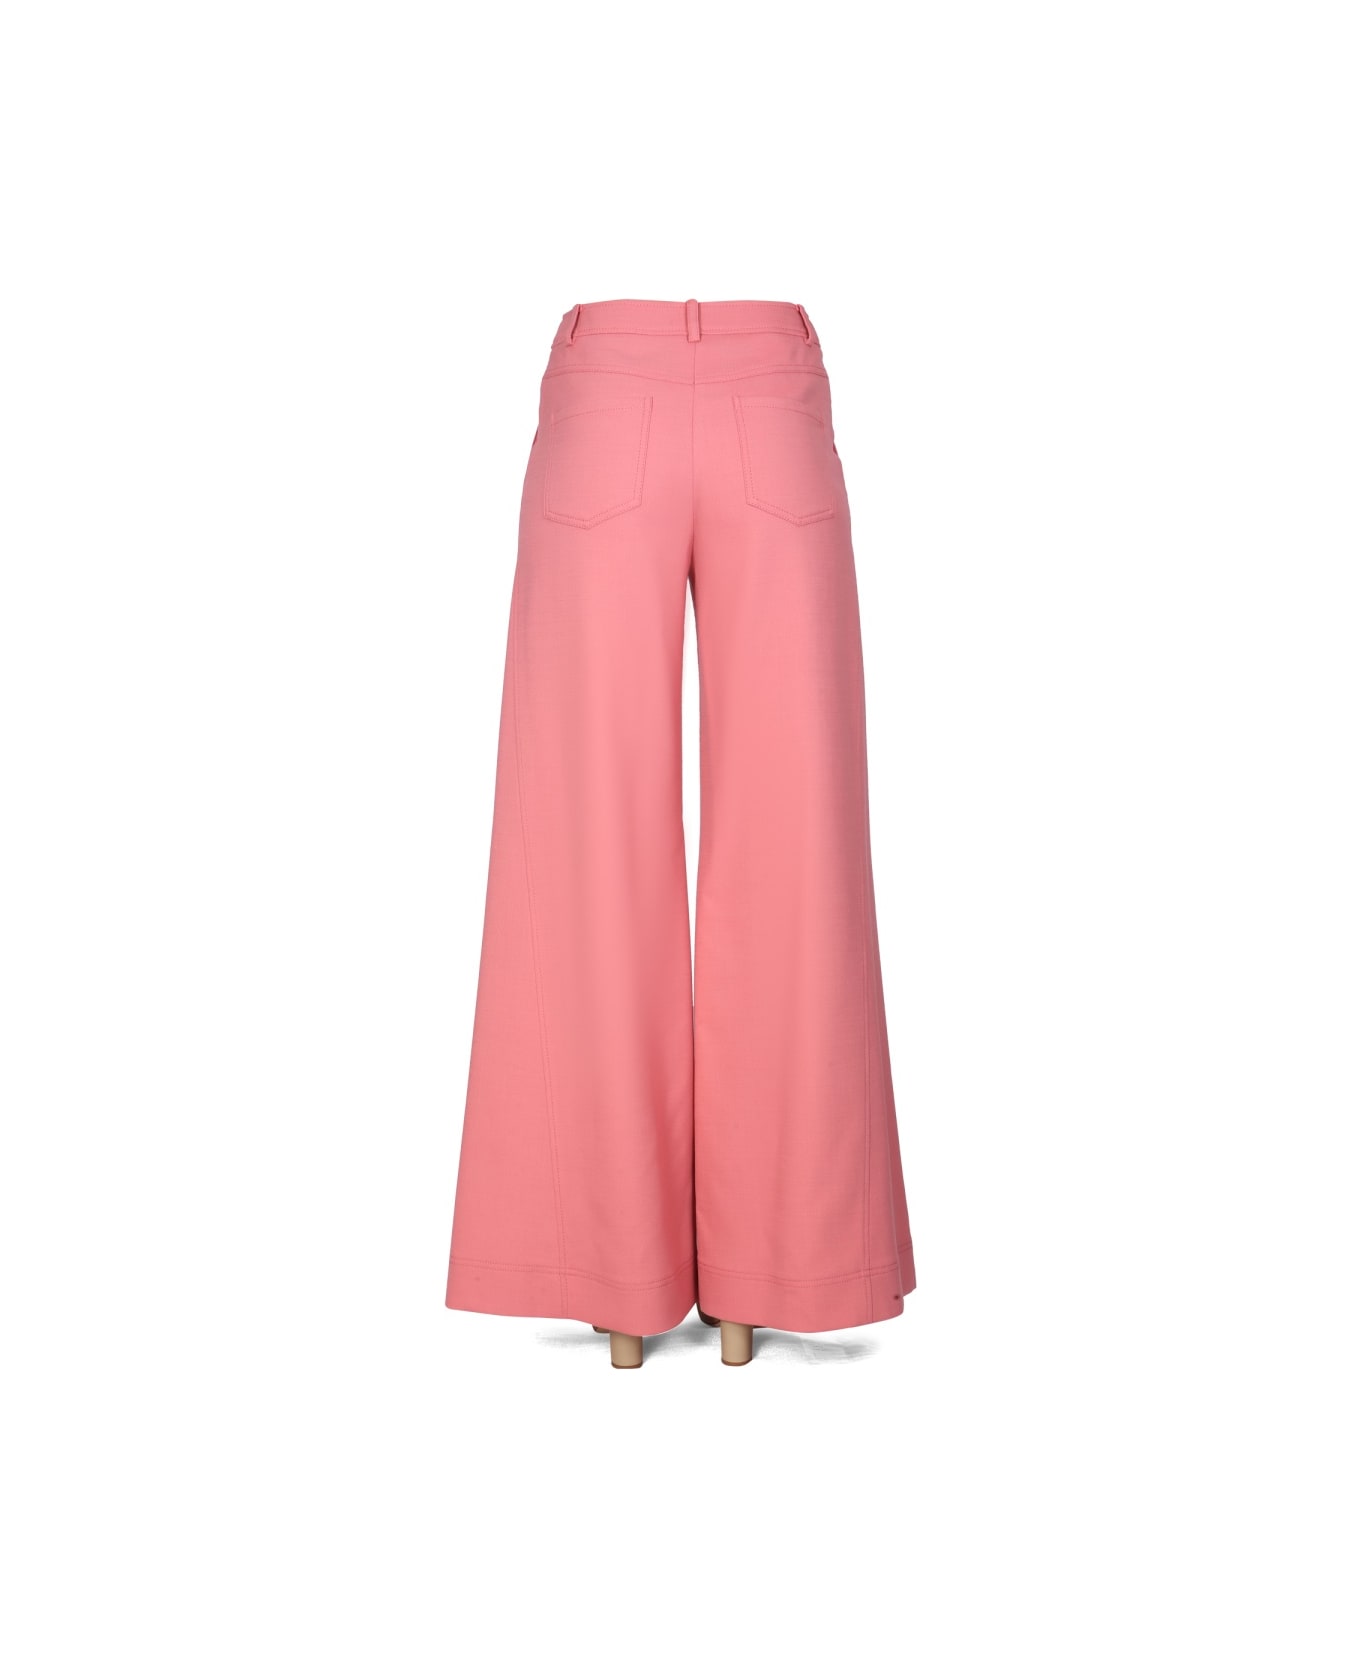 Boutique Moschino Chic Flare Pants - PINK ボトムス